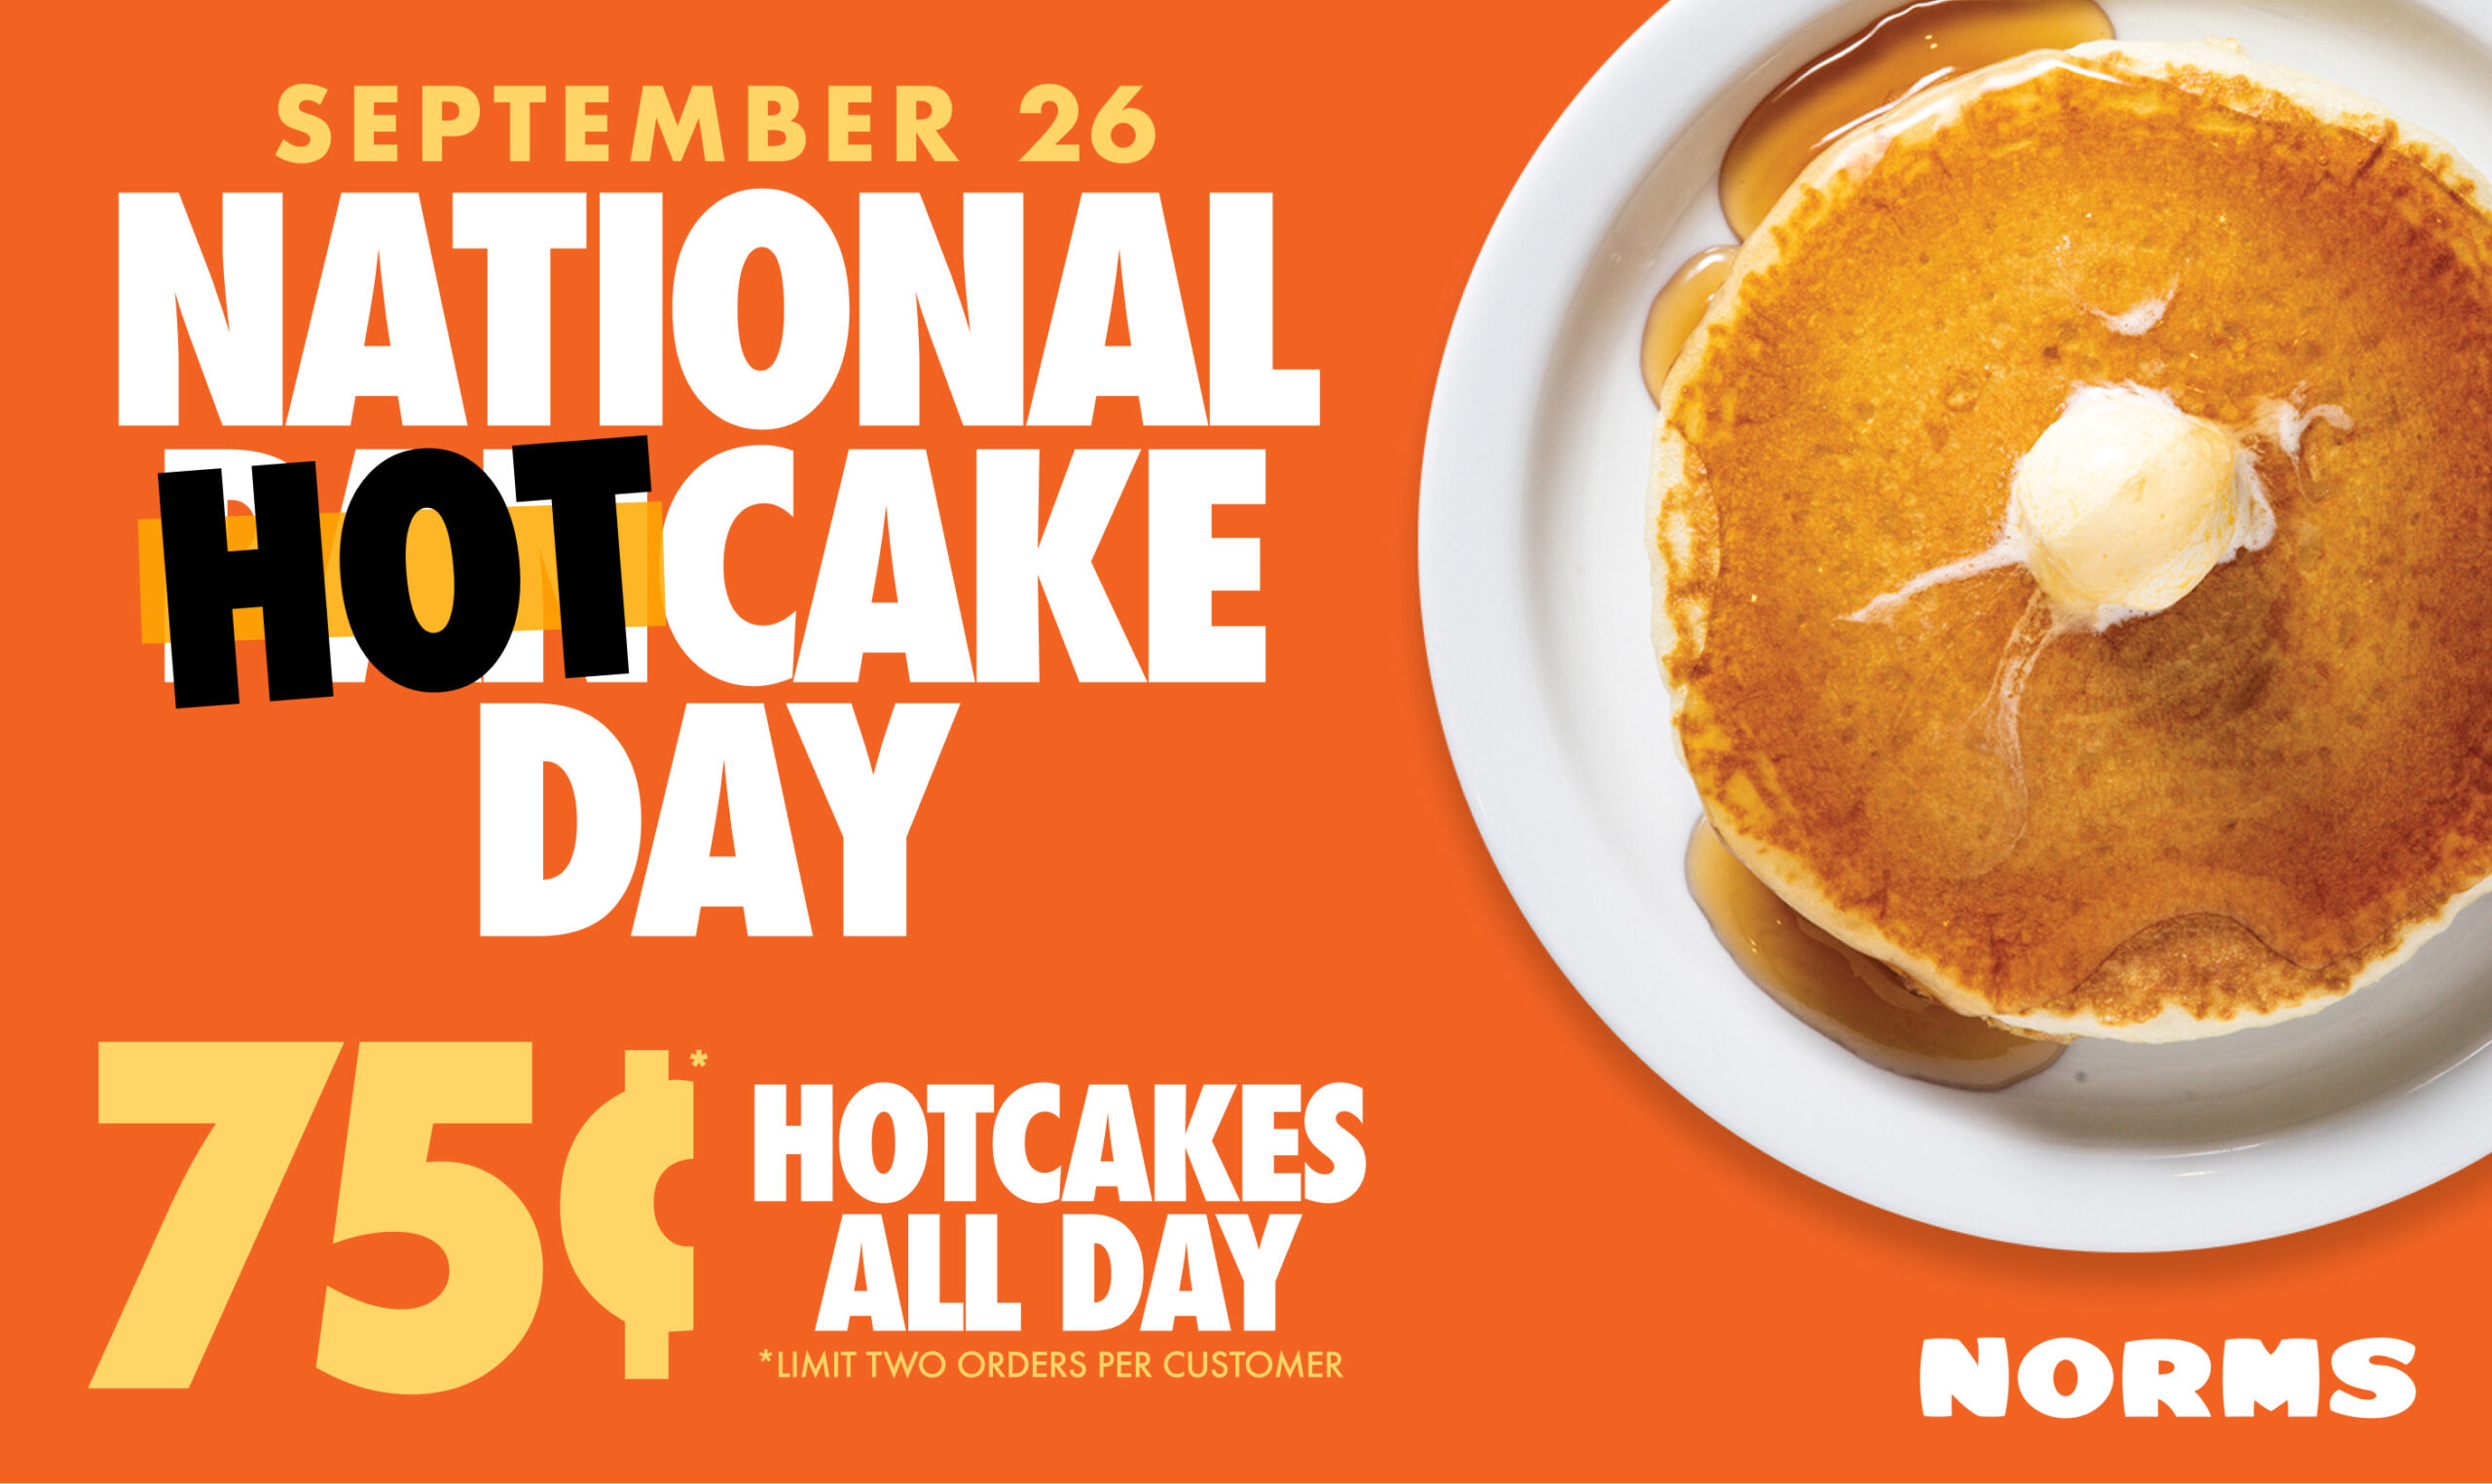 NORMS HotcakeDay Poster scaled